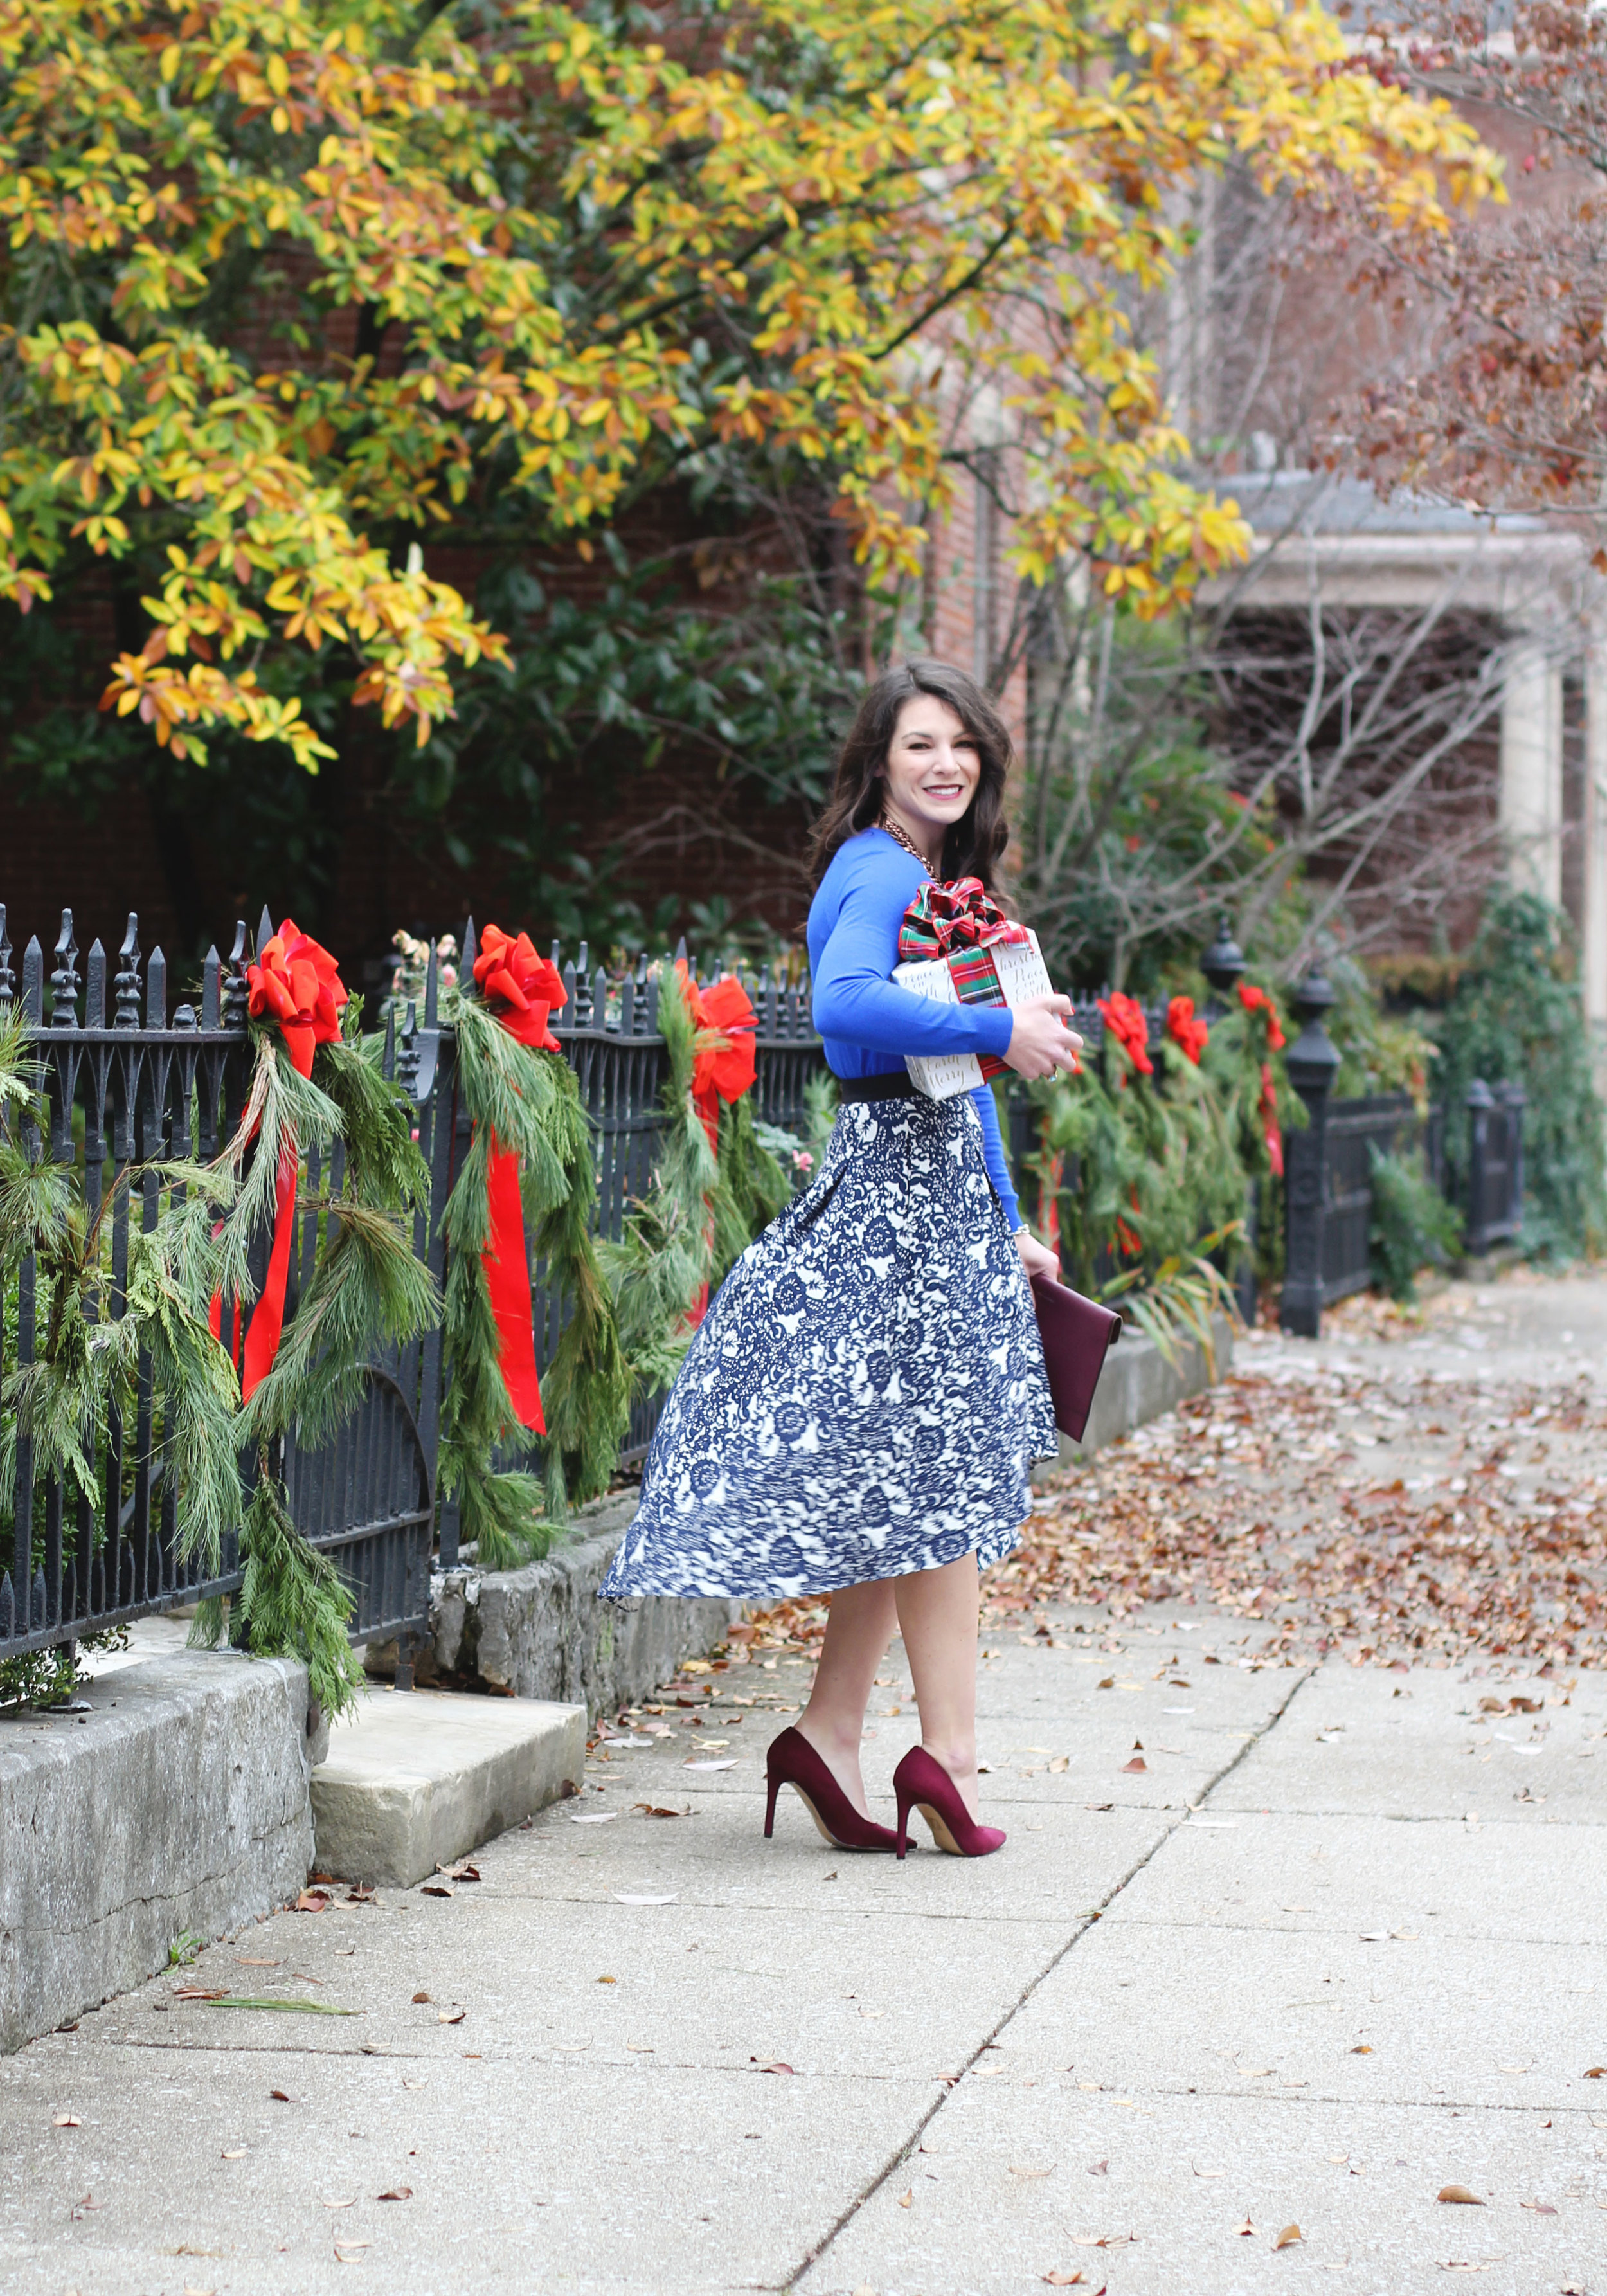 Holiday Outfit, Christmas Party Outfit, Anthropologie Vespertine High Low Skirt, Target Cobalt Blue Sweater, Wine Pumps, Rebecca Minkoff Envelope Clutch, Baublebar Courtney Bib Neclace